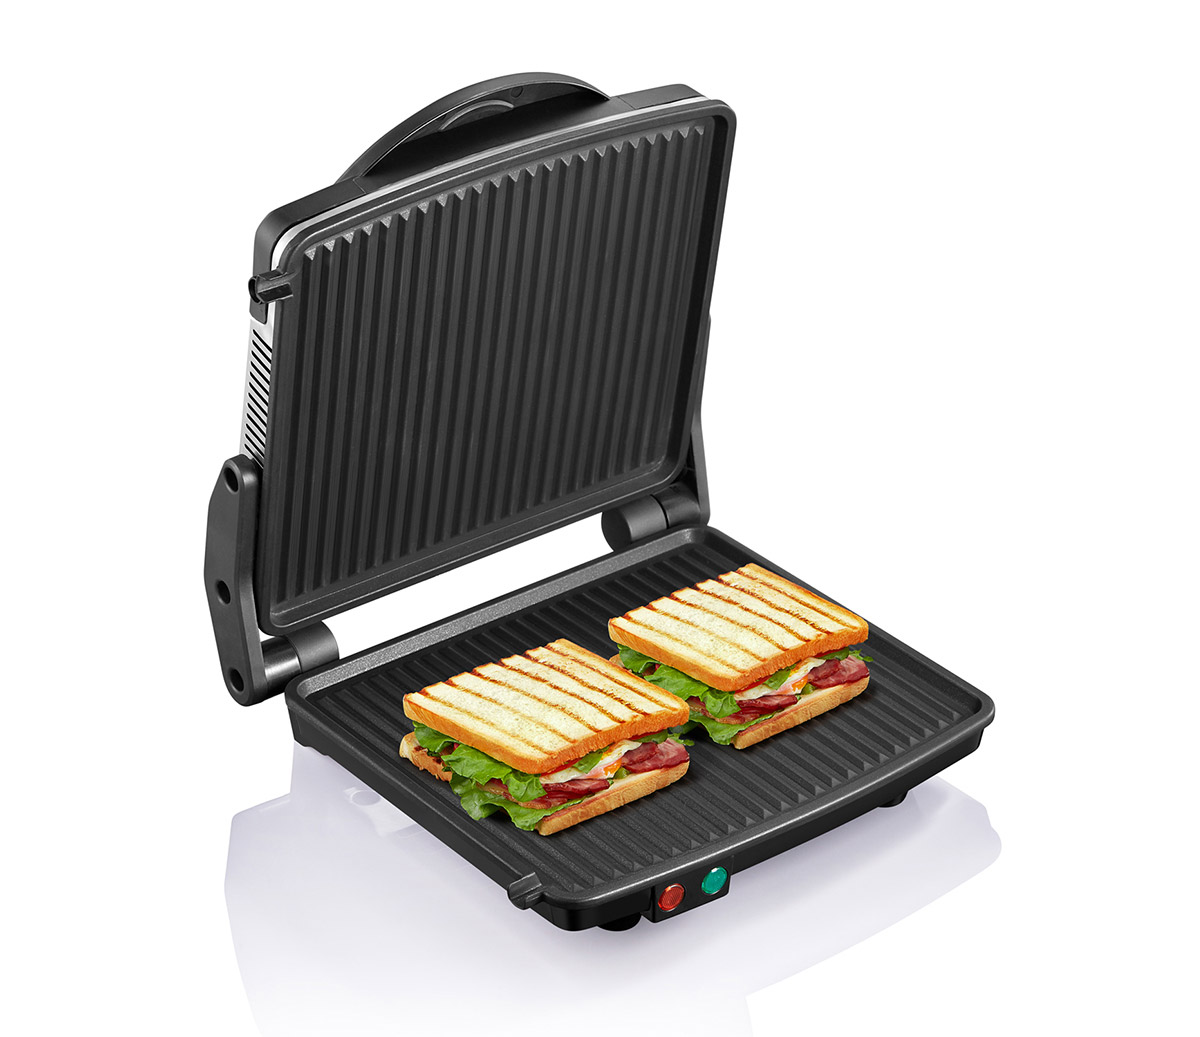 Panini Press Grill, Yabano Gourmet Sandwich Maker Non-Stick Coated Plates, Opens 180 Degrees to Fit Any Type or Size of Food, Stainless Steel Surface and Removable Drip Tray, 4 Slice 